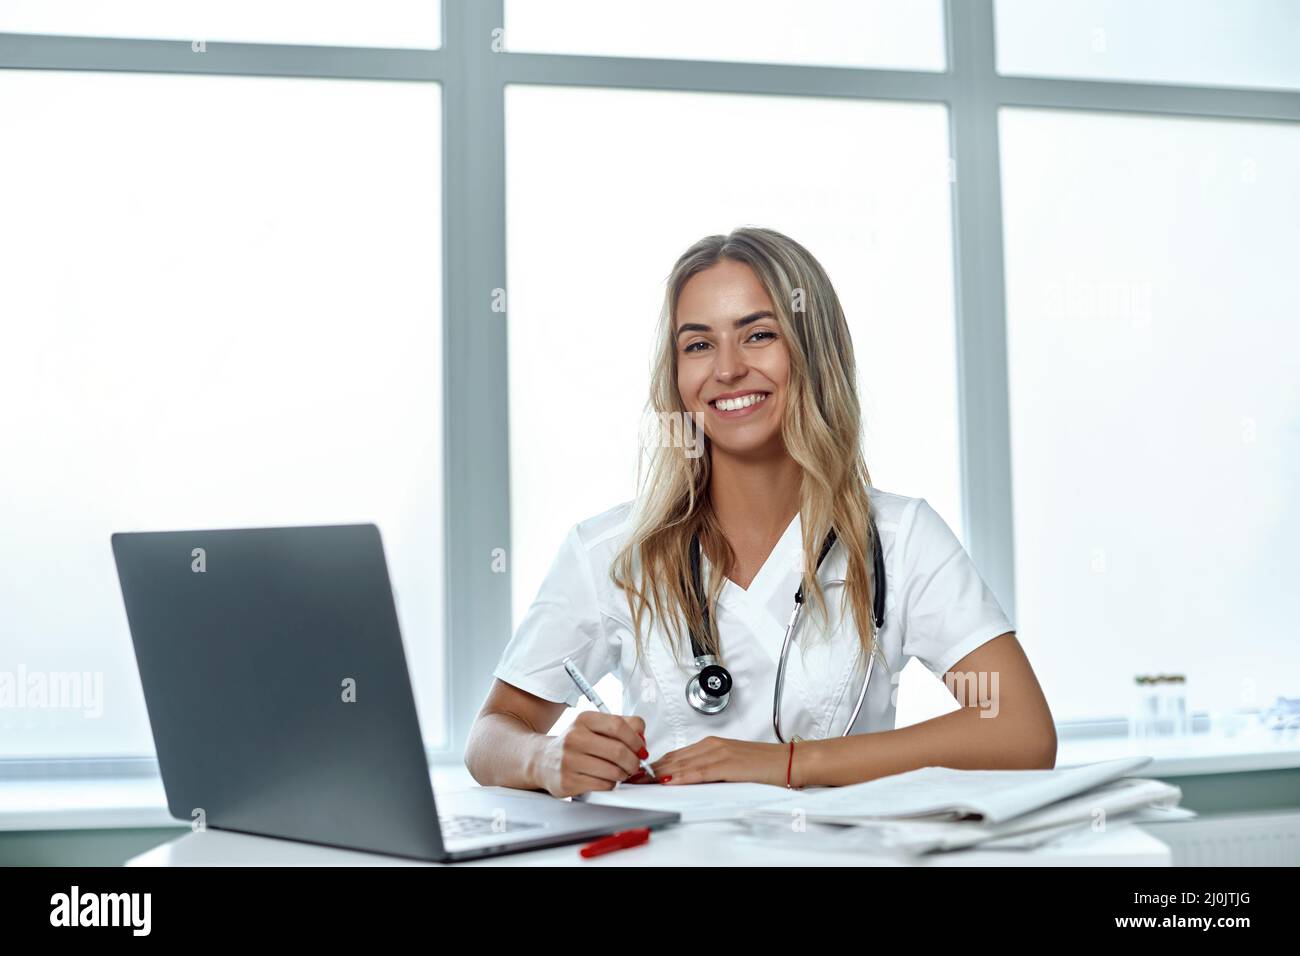 Female doctor working with her laptop in medical office Stock Photo